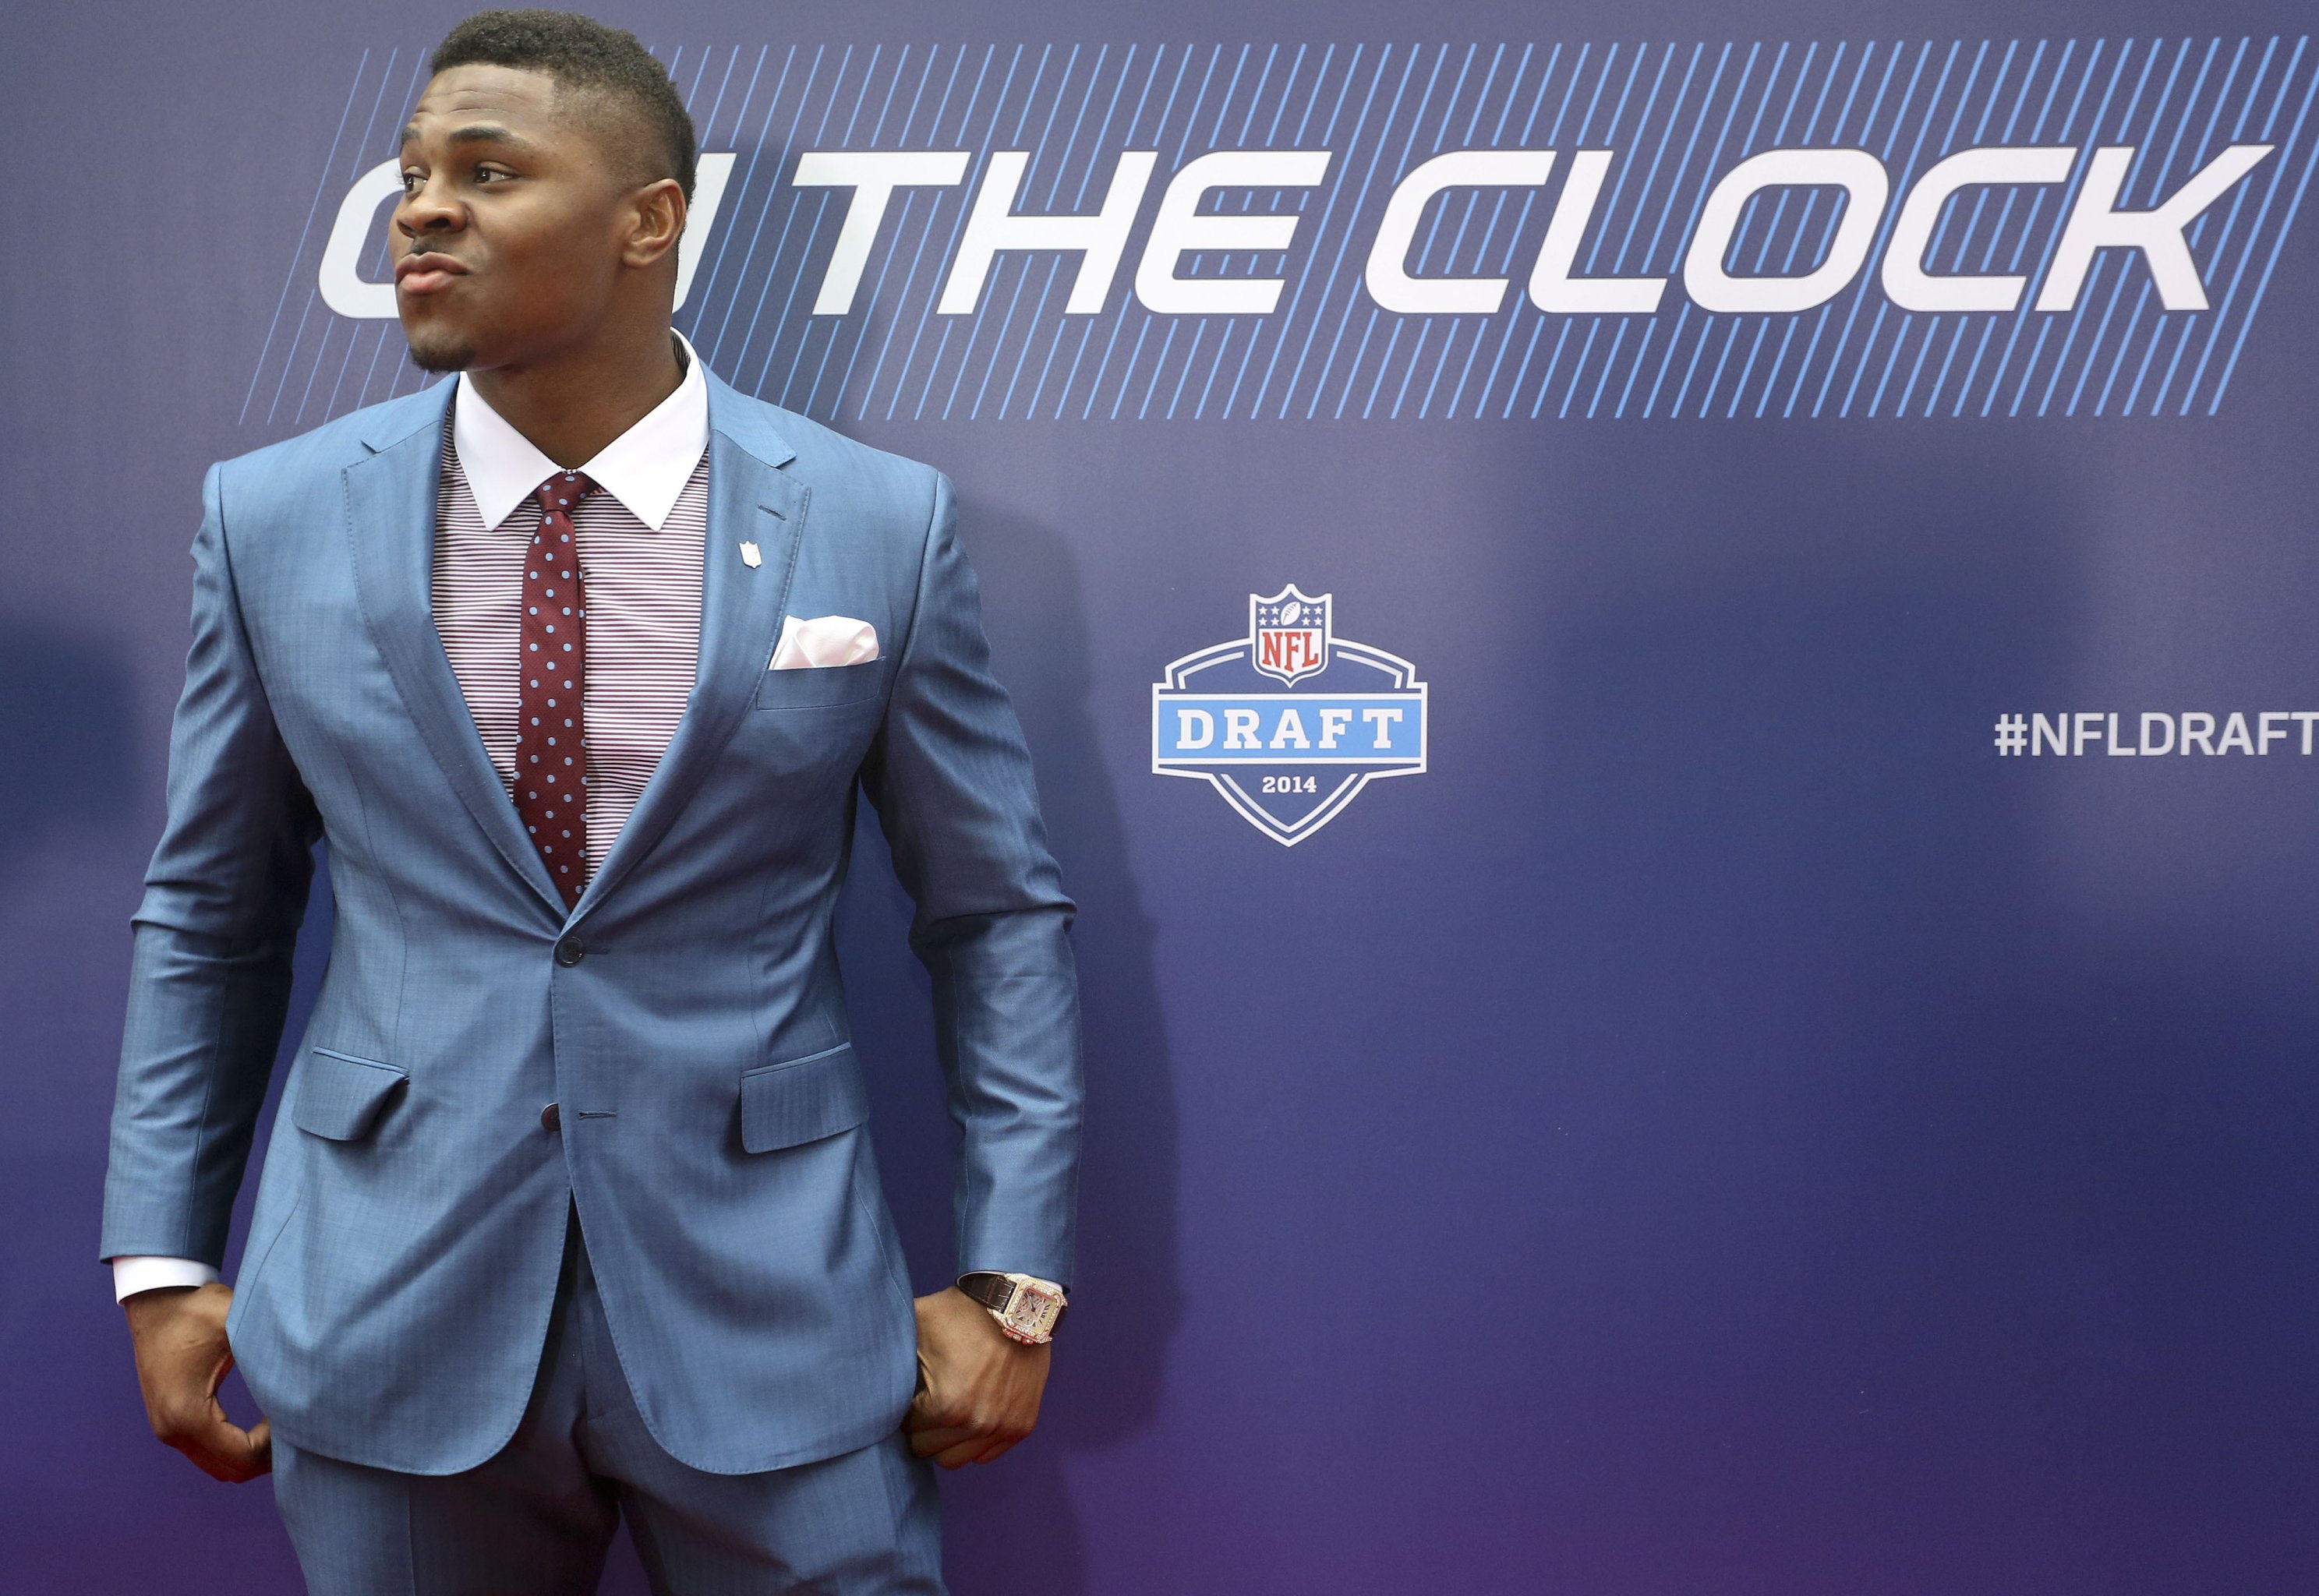 48+ Best Nfl Draft Outfits Gif